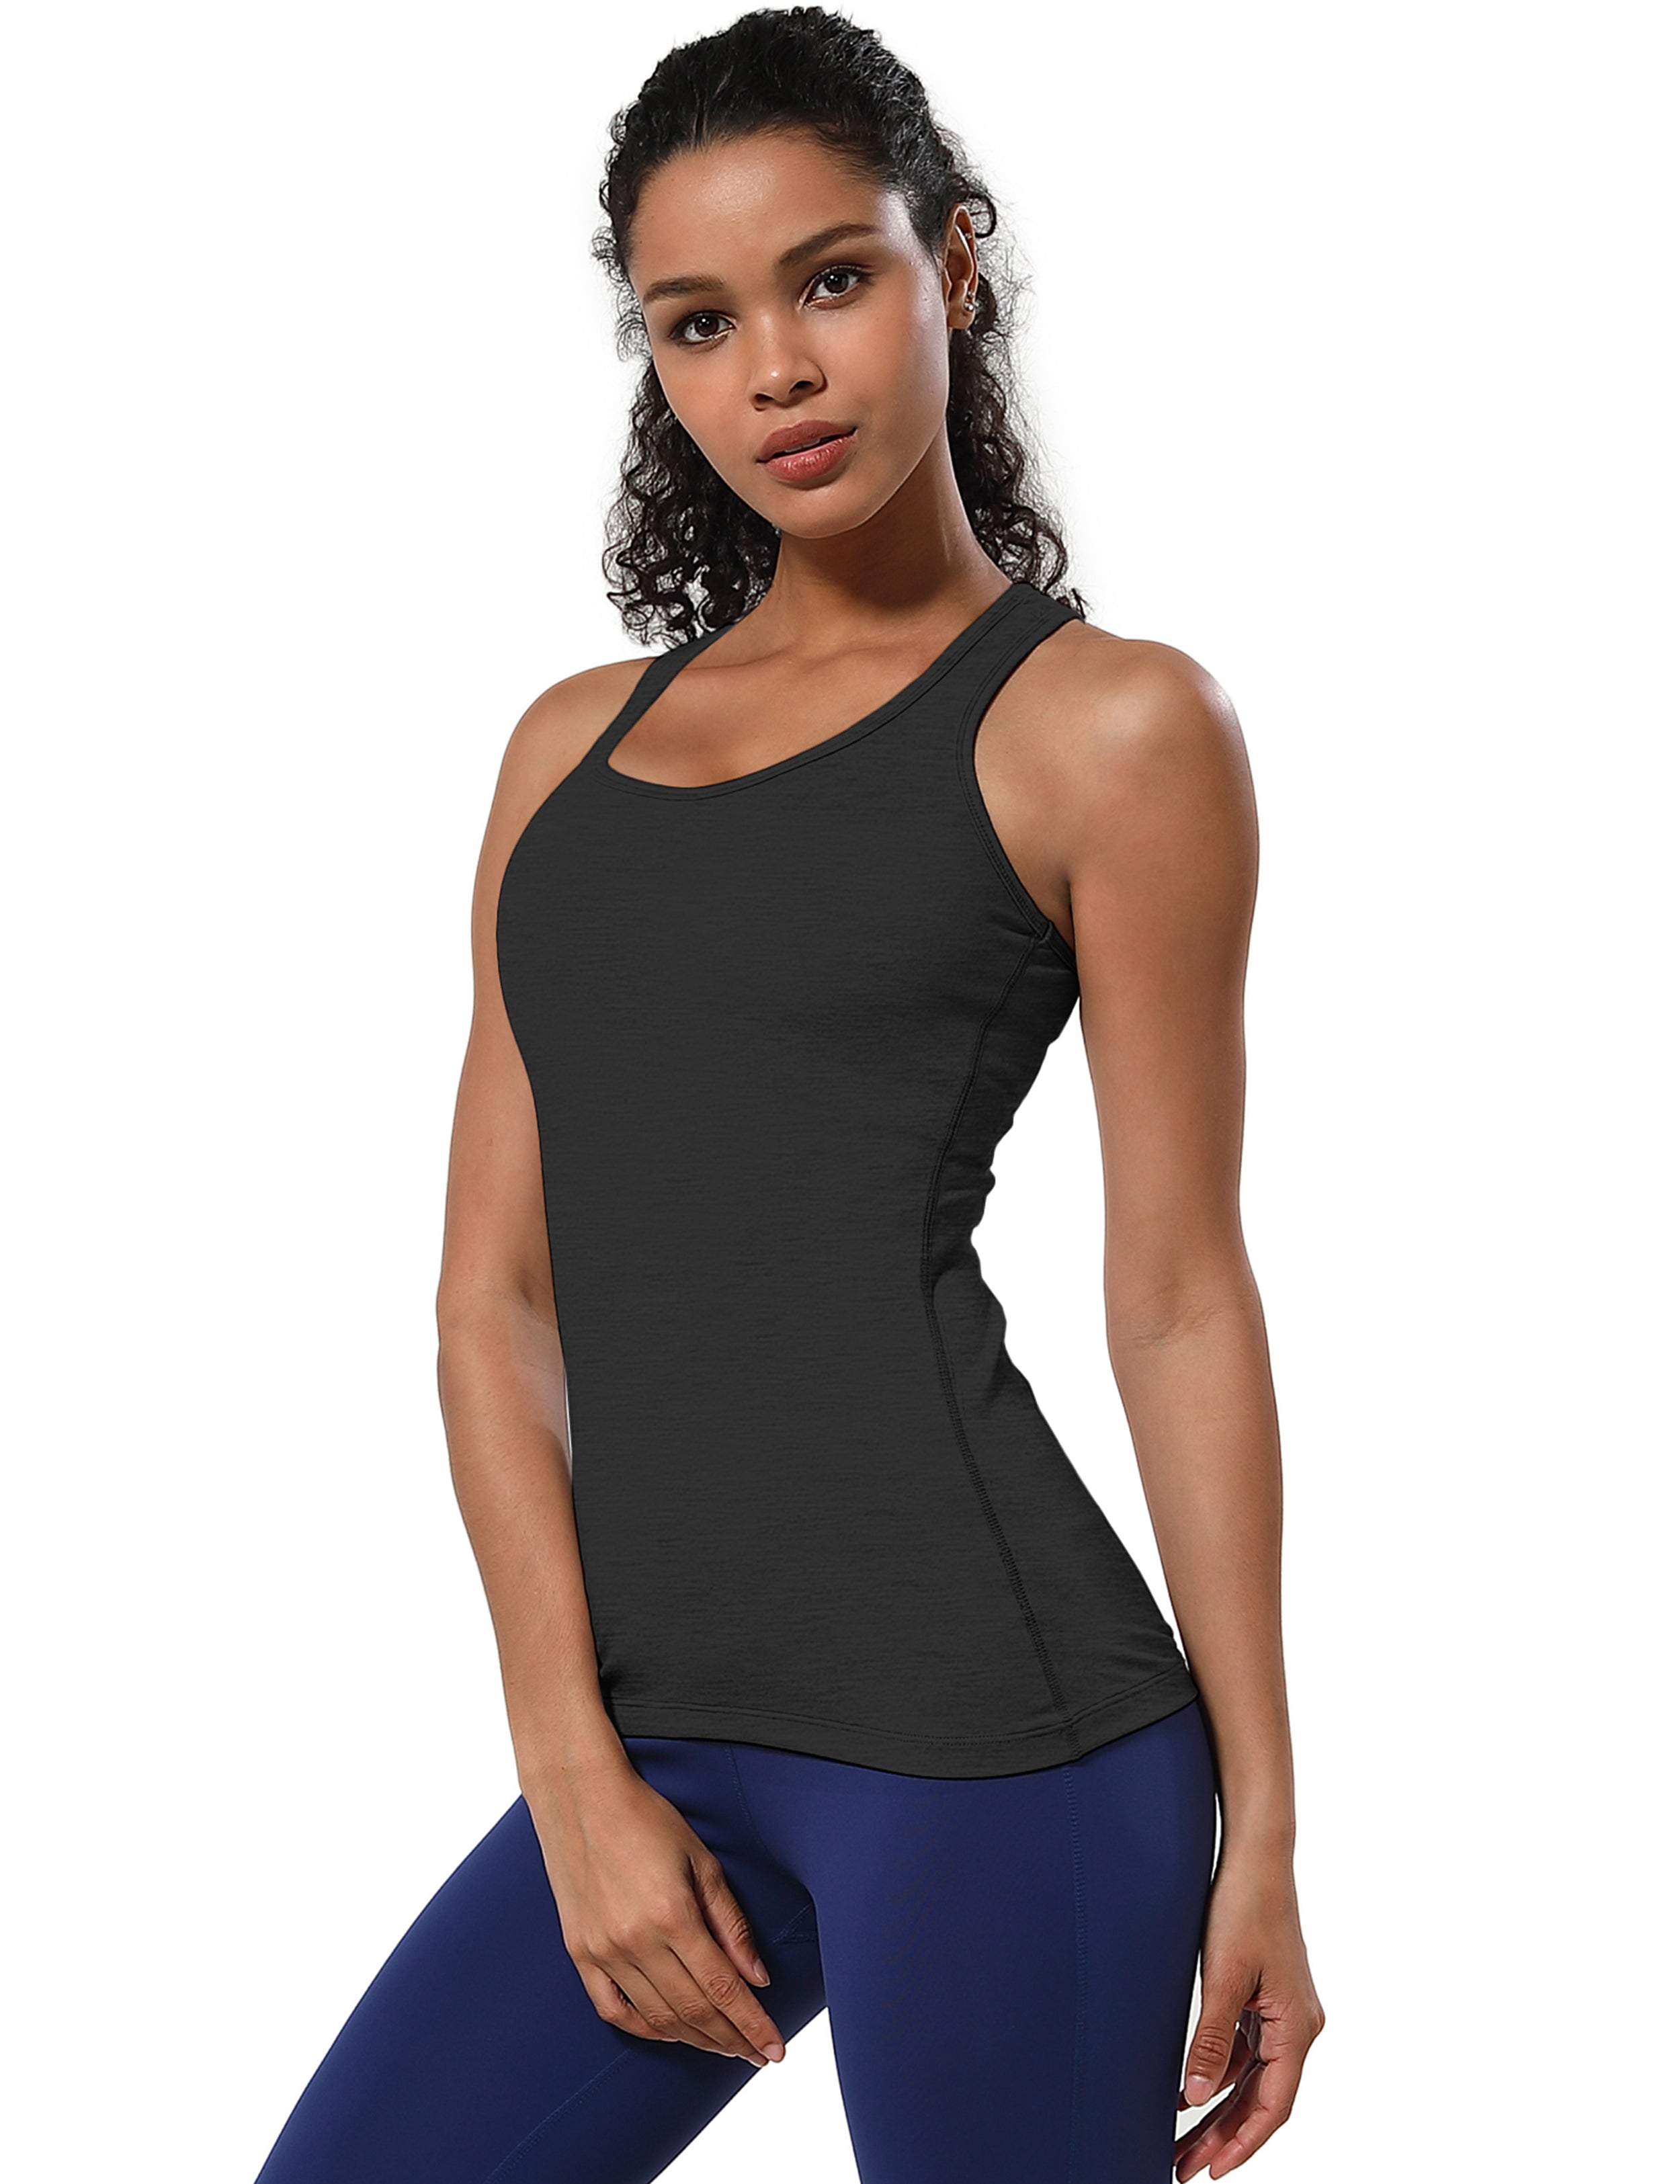 Racerback Athletic Tank Tops heathercharcoal 92%Nylon/8%Spandex(Cotton Soft) Designed for Tall Size Tight Fit So buttery soft, it feels weightless Sweat-wicking Four-way stretch Breathable Contours your body Sits below the waistband for moderate, everyday coverage